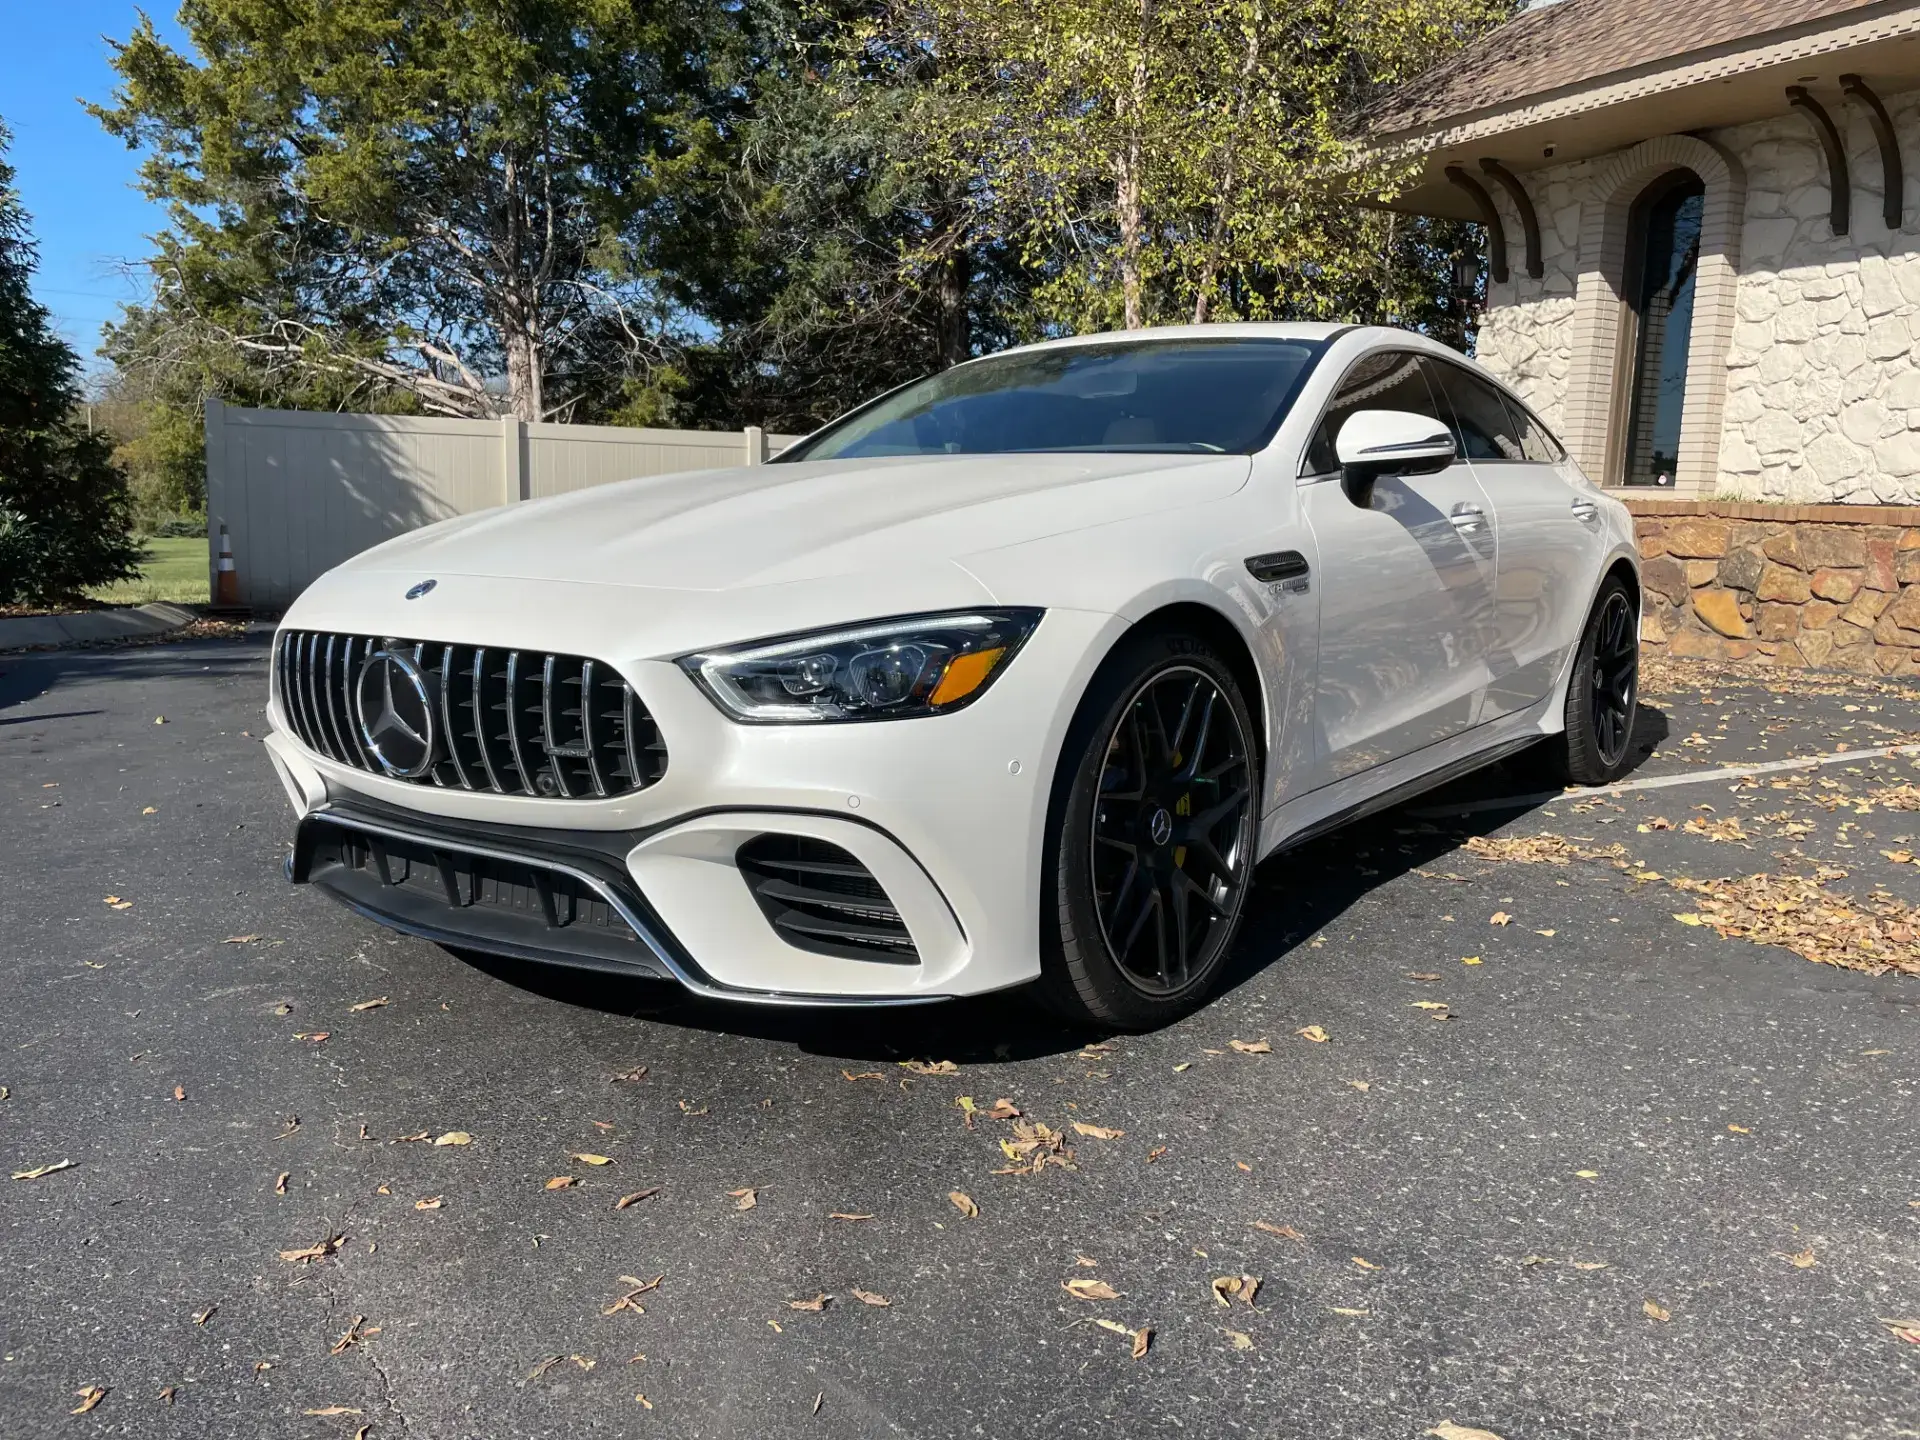 Mercedes-Benz AMG GT-Class for Sale in Kenya